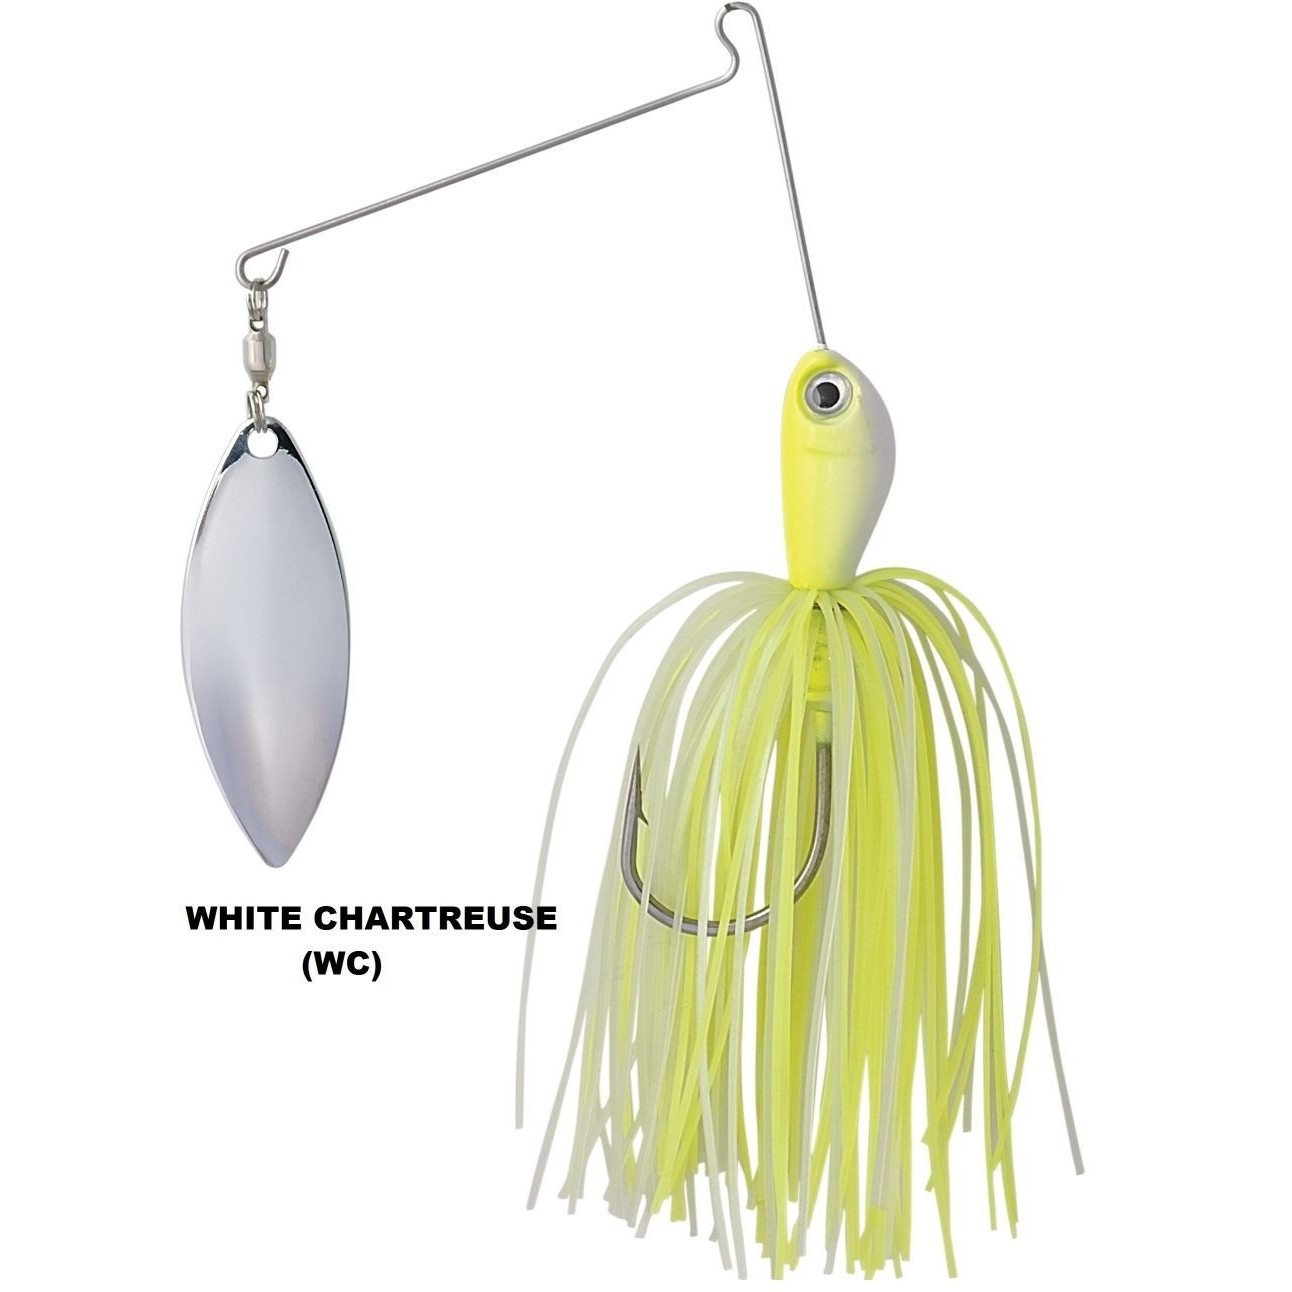 SPINNERBAIT RAPTURE SNIPER DOUBLE BLADE, WHITE CHARTREUSE, 14G - 188-21-202